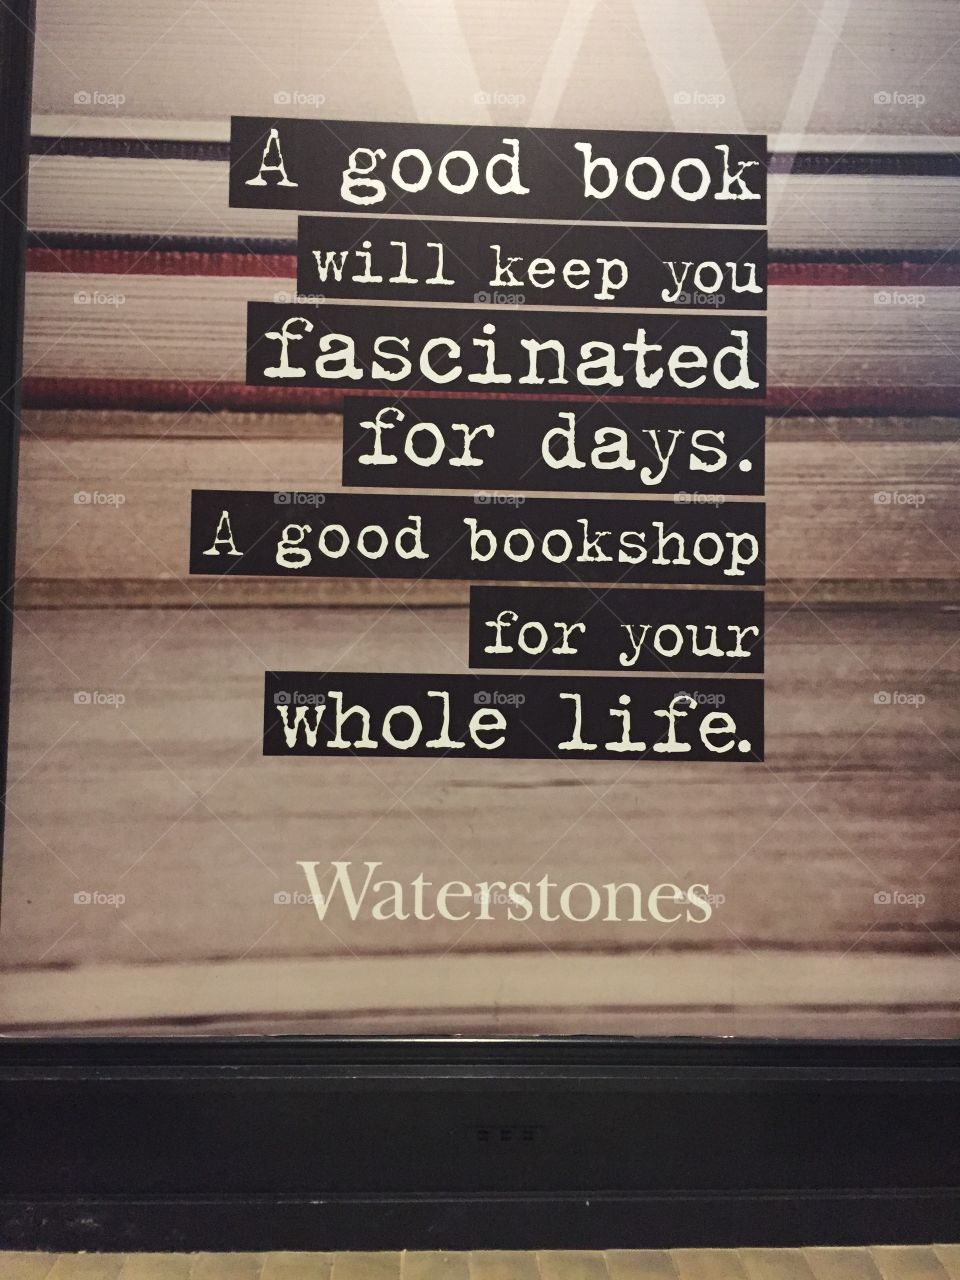 Advertising for a large bookshop in London